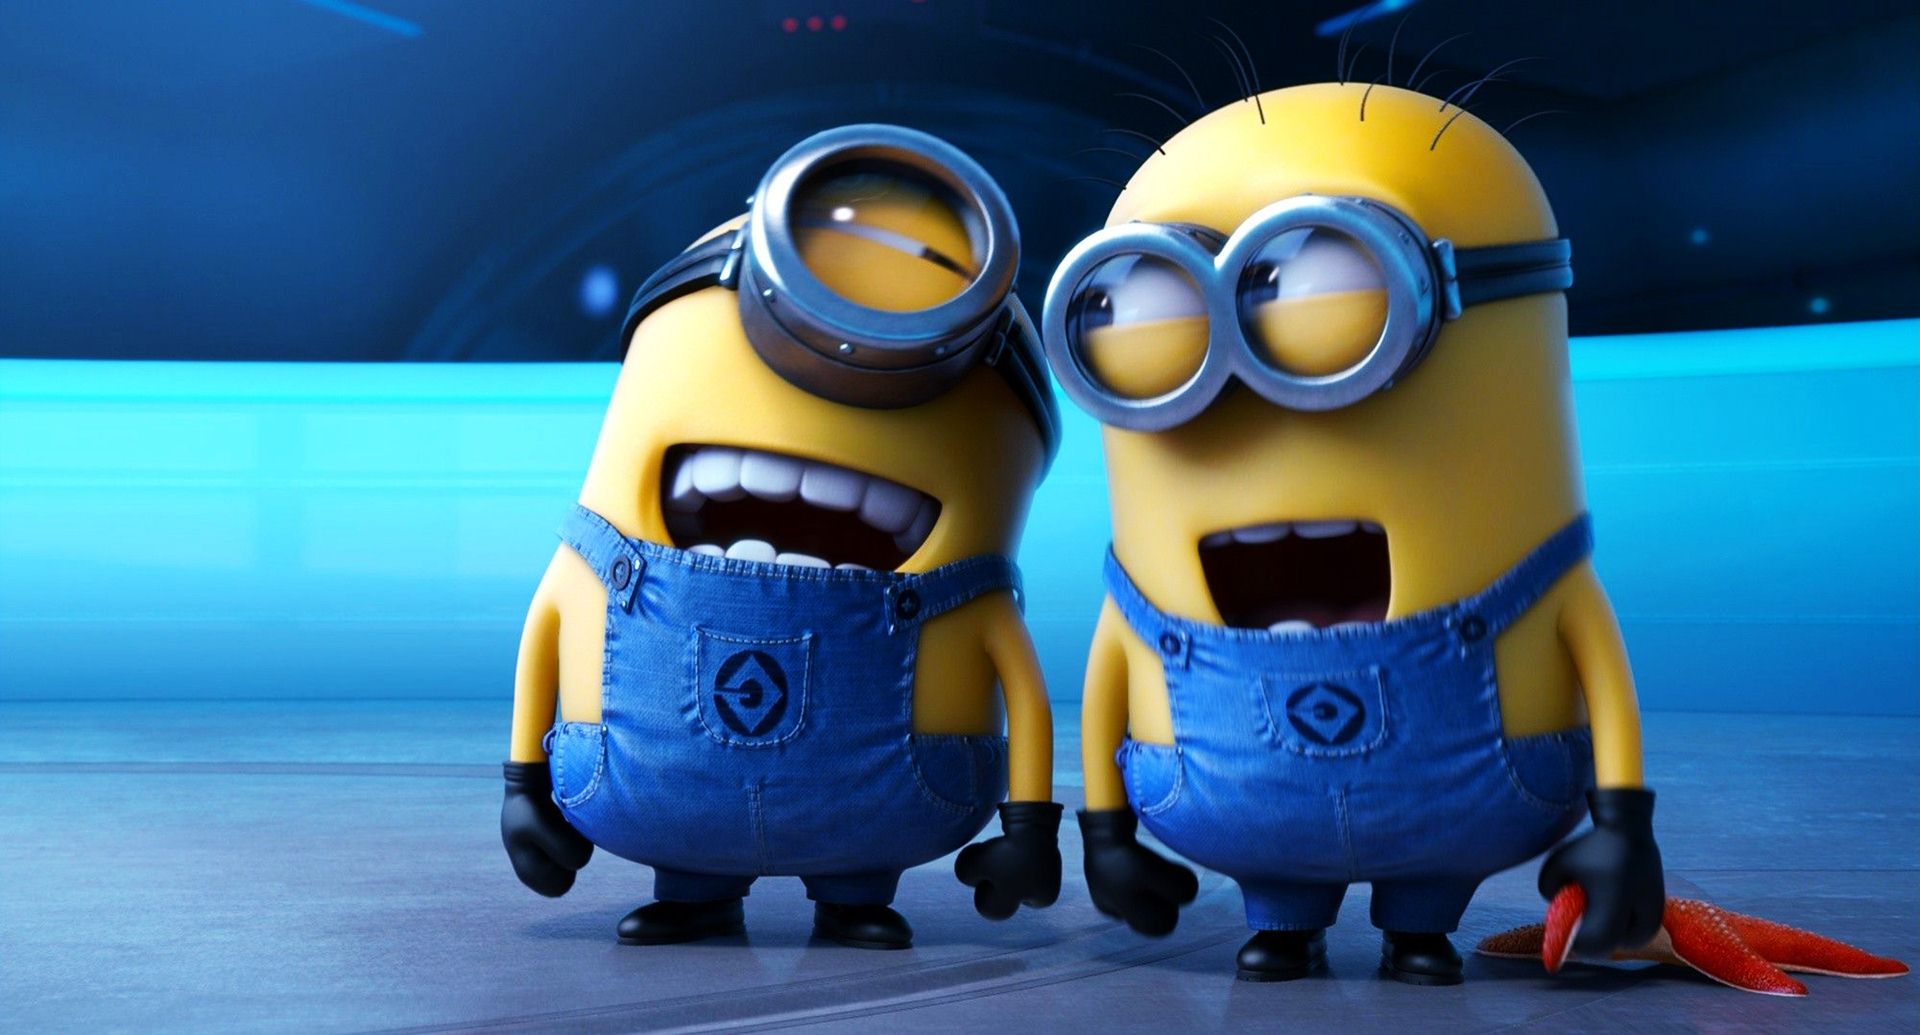 Funny Minion Desktop Backgrounds for Computer